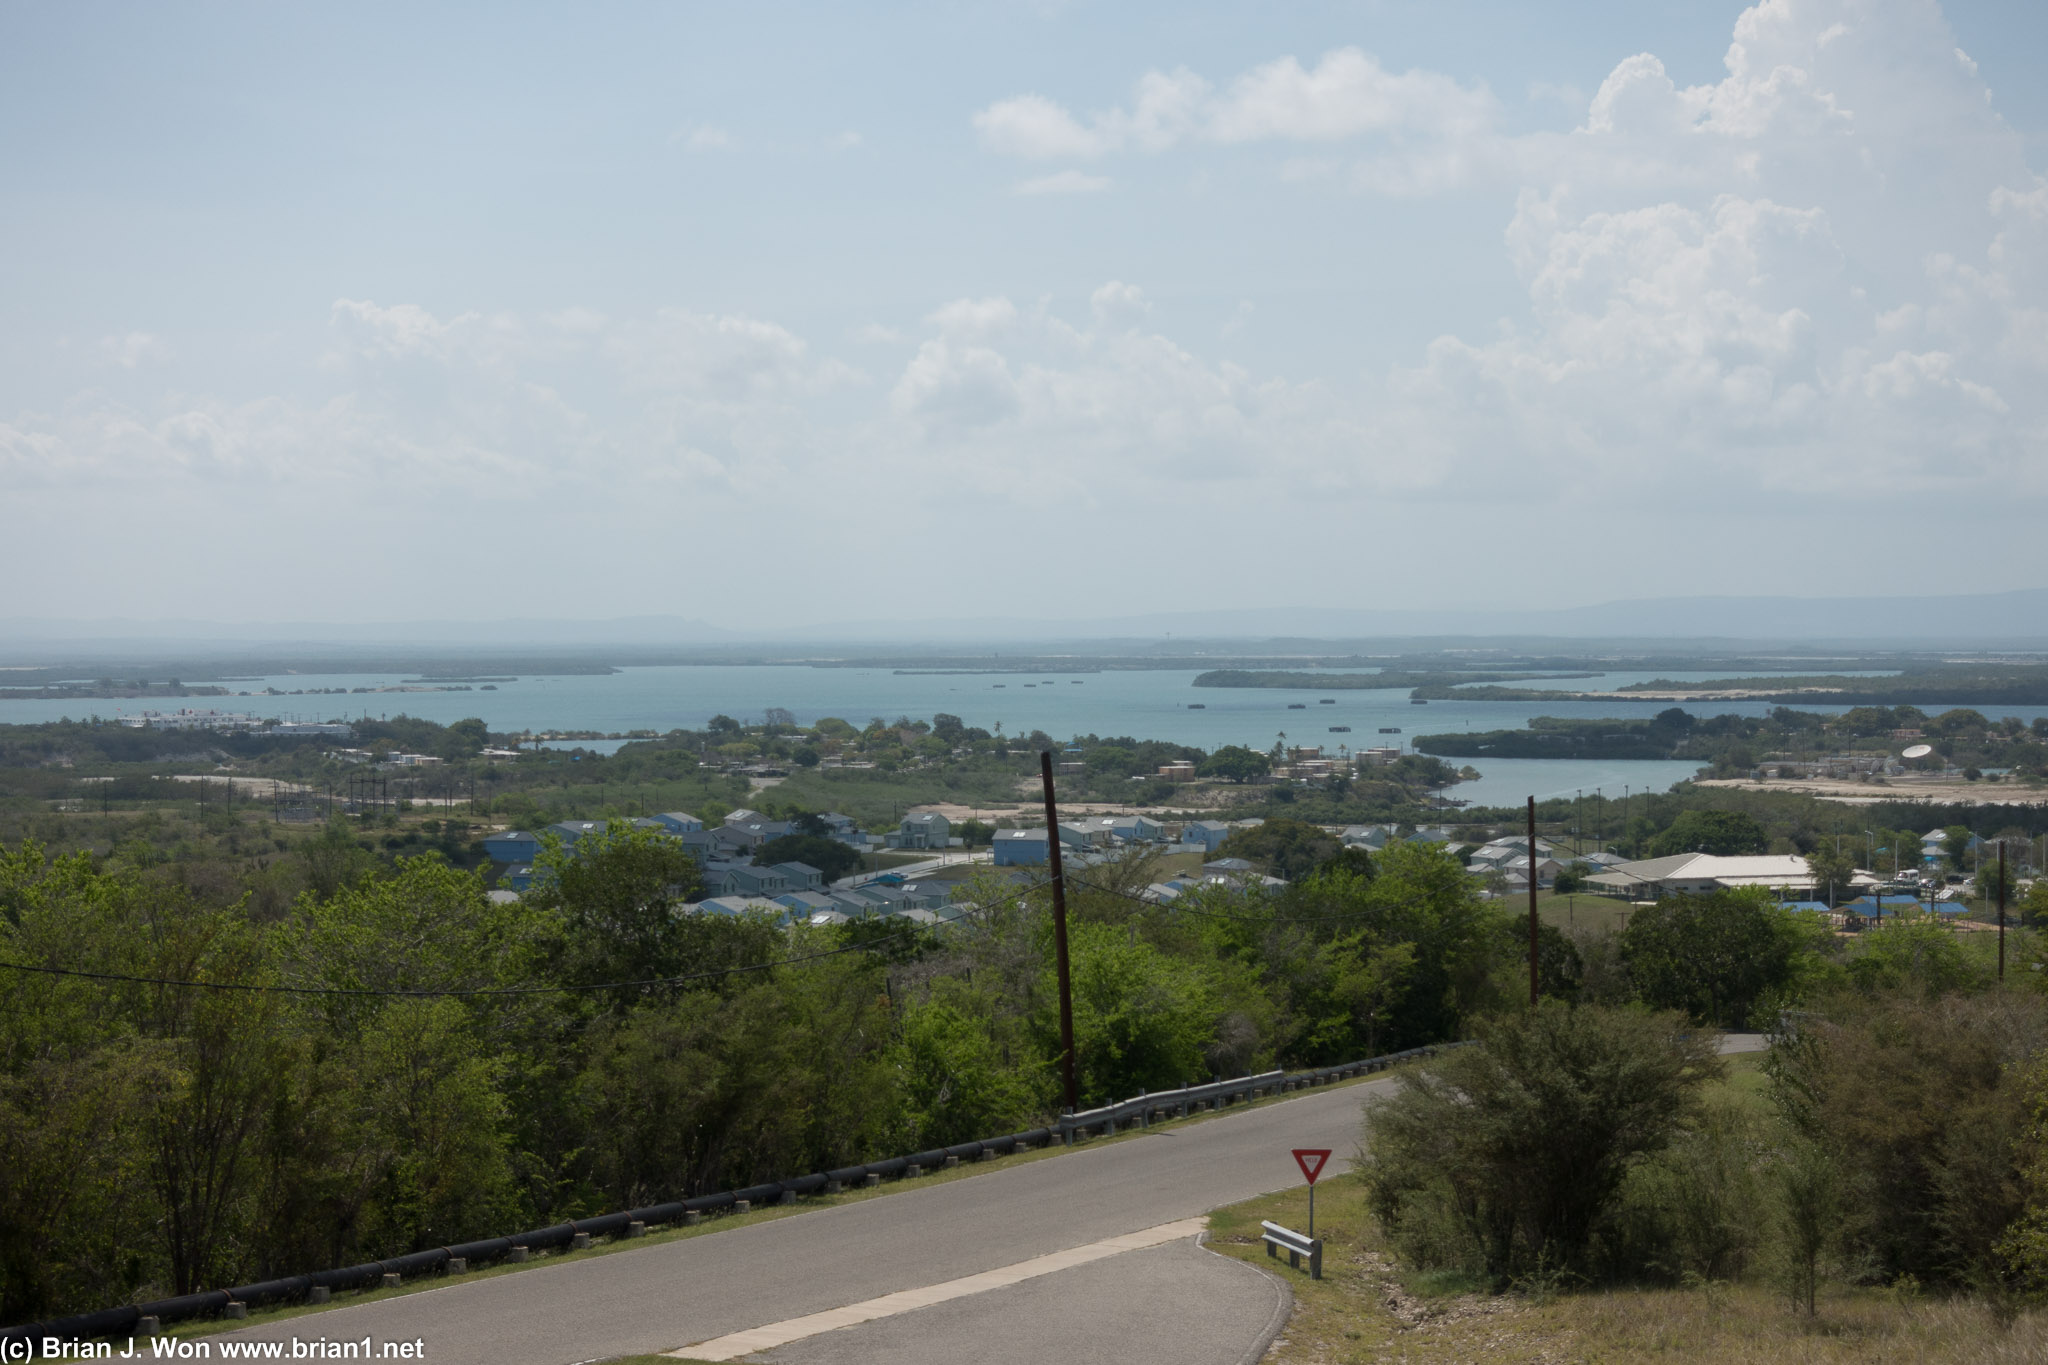 Overlooking Guantanamo Bay. Tons of old fueling piers still in the bay.